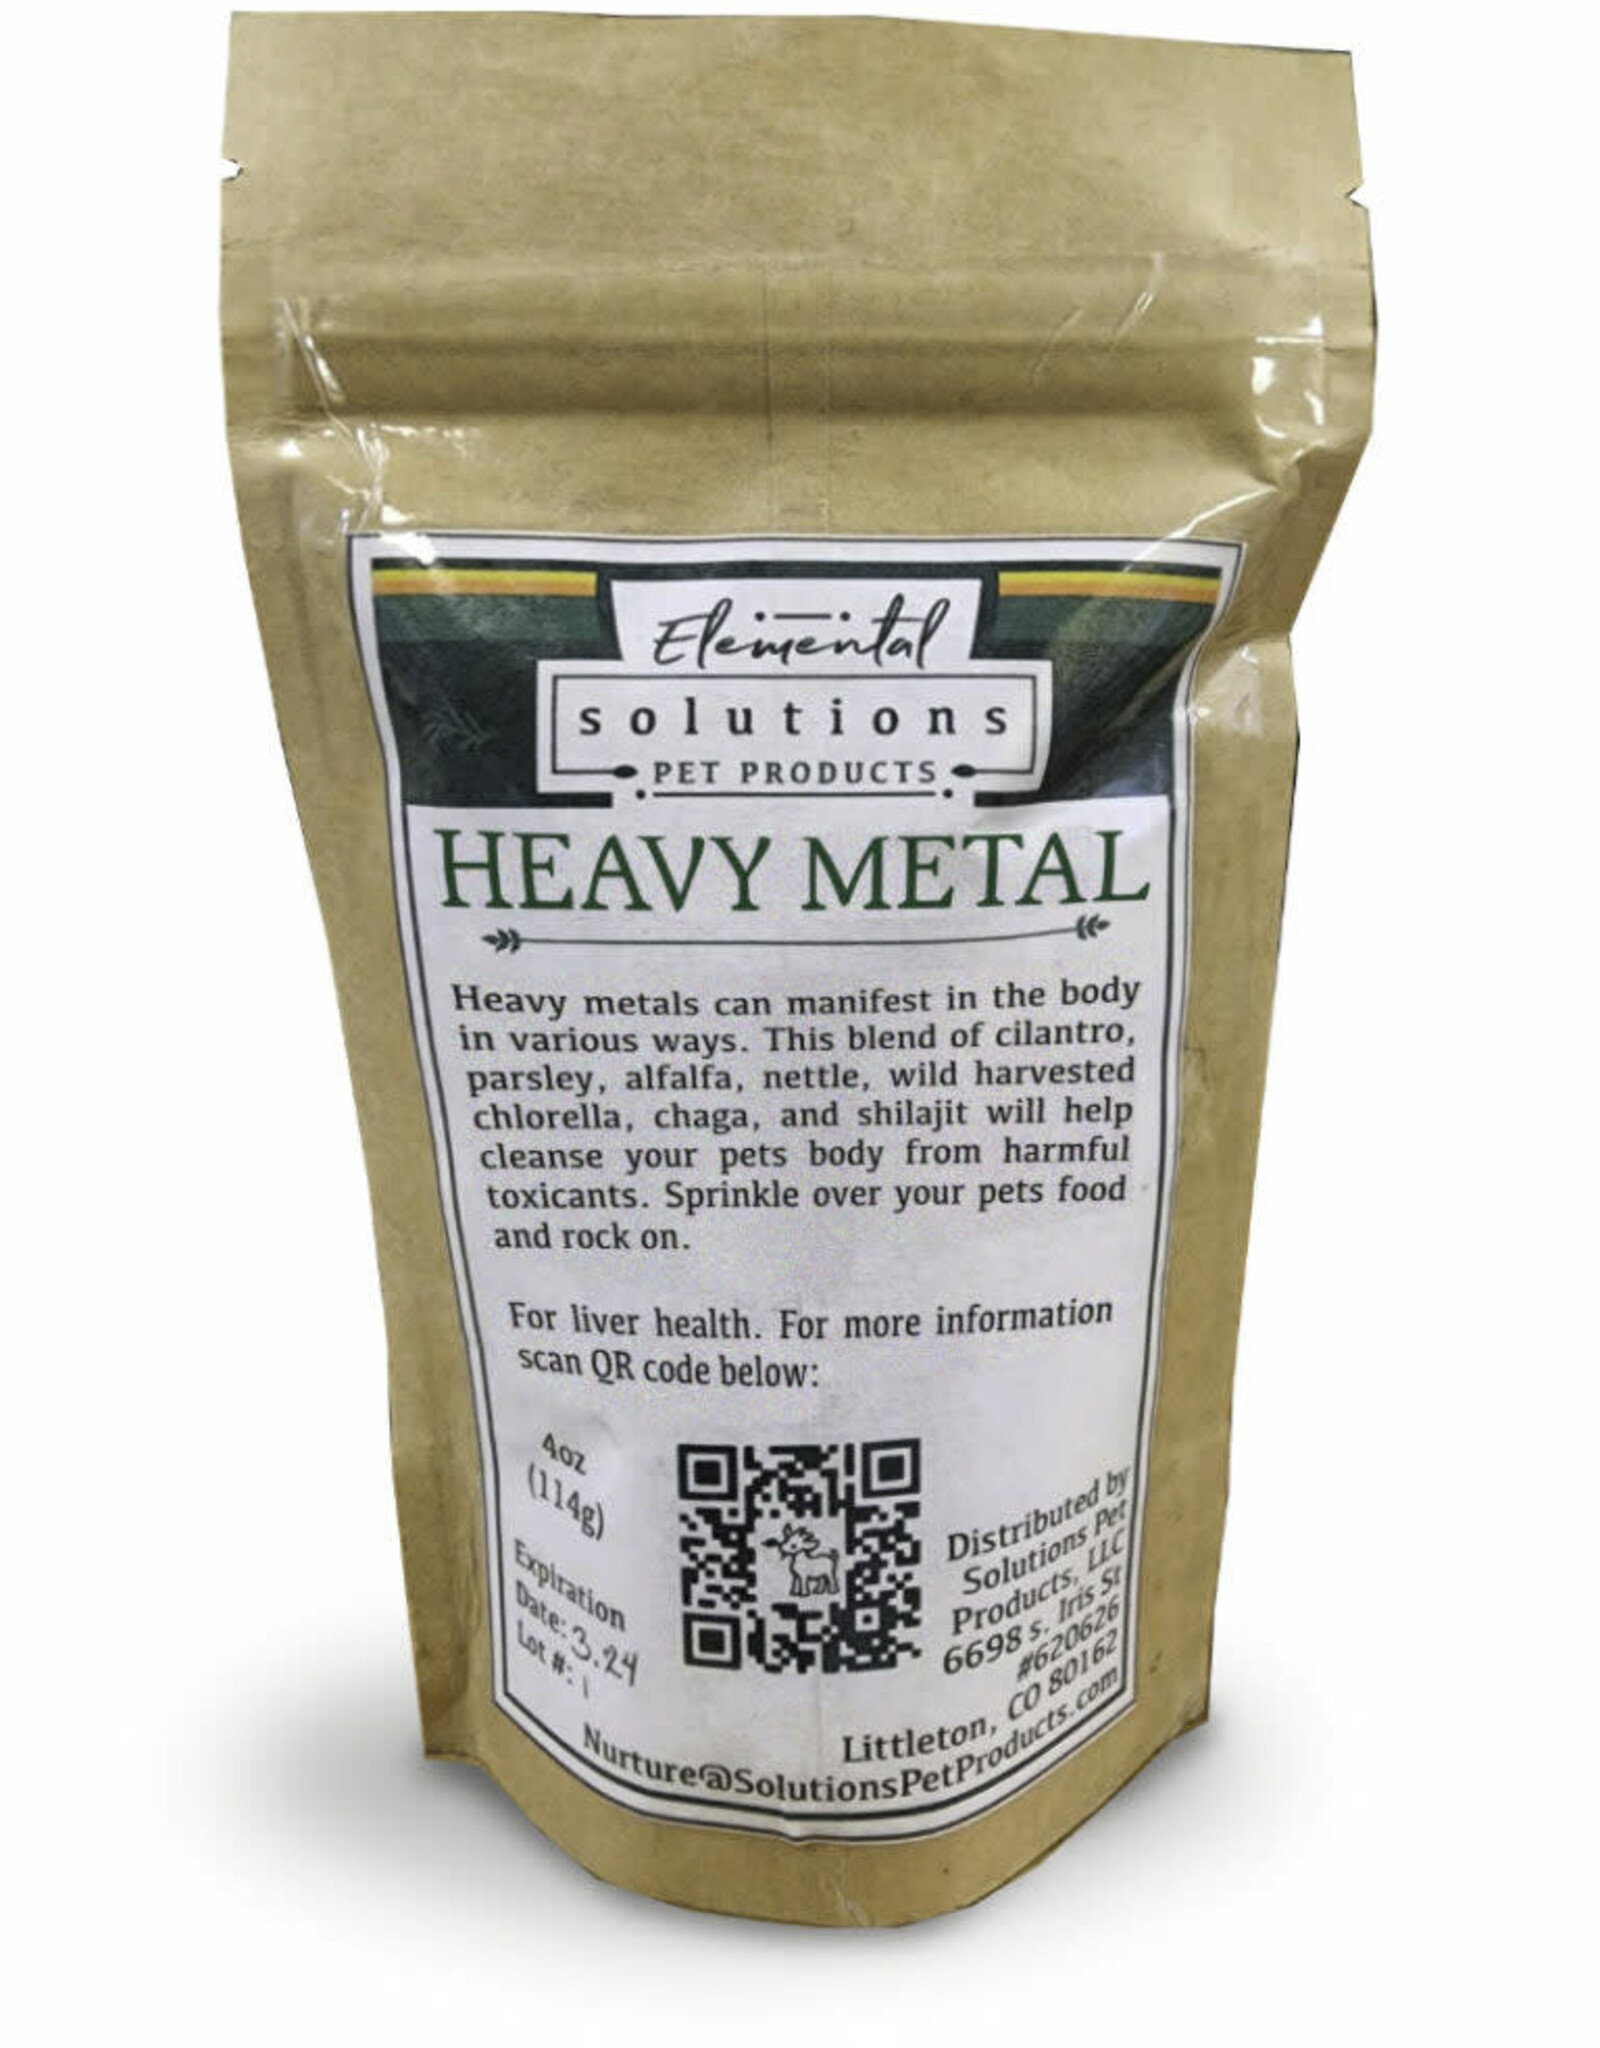 Solutions Pet Products Solutions Heavy Metal Herbal Supplement